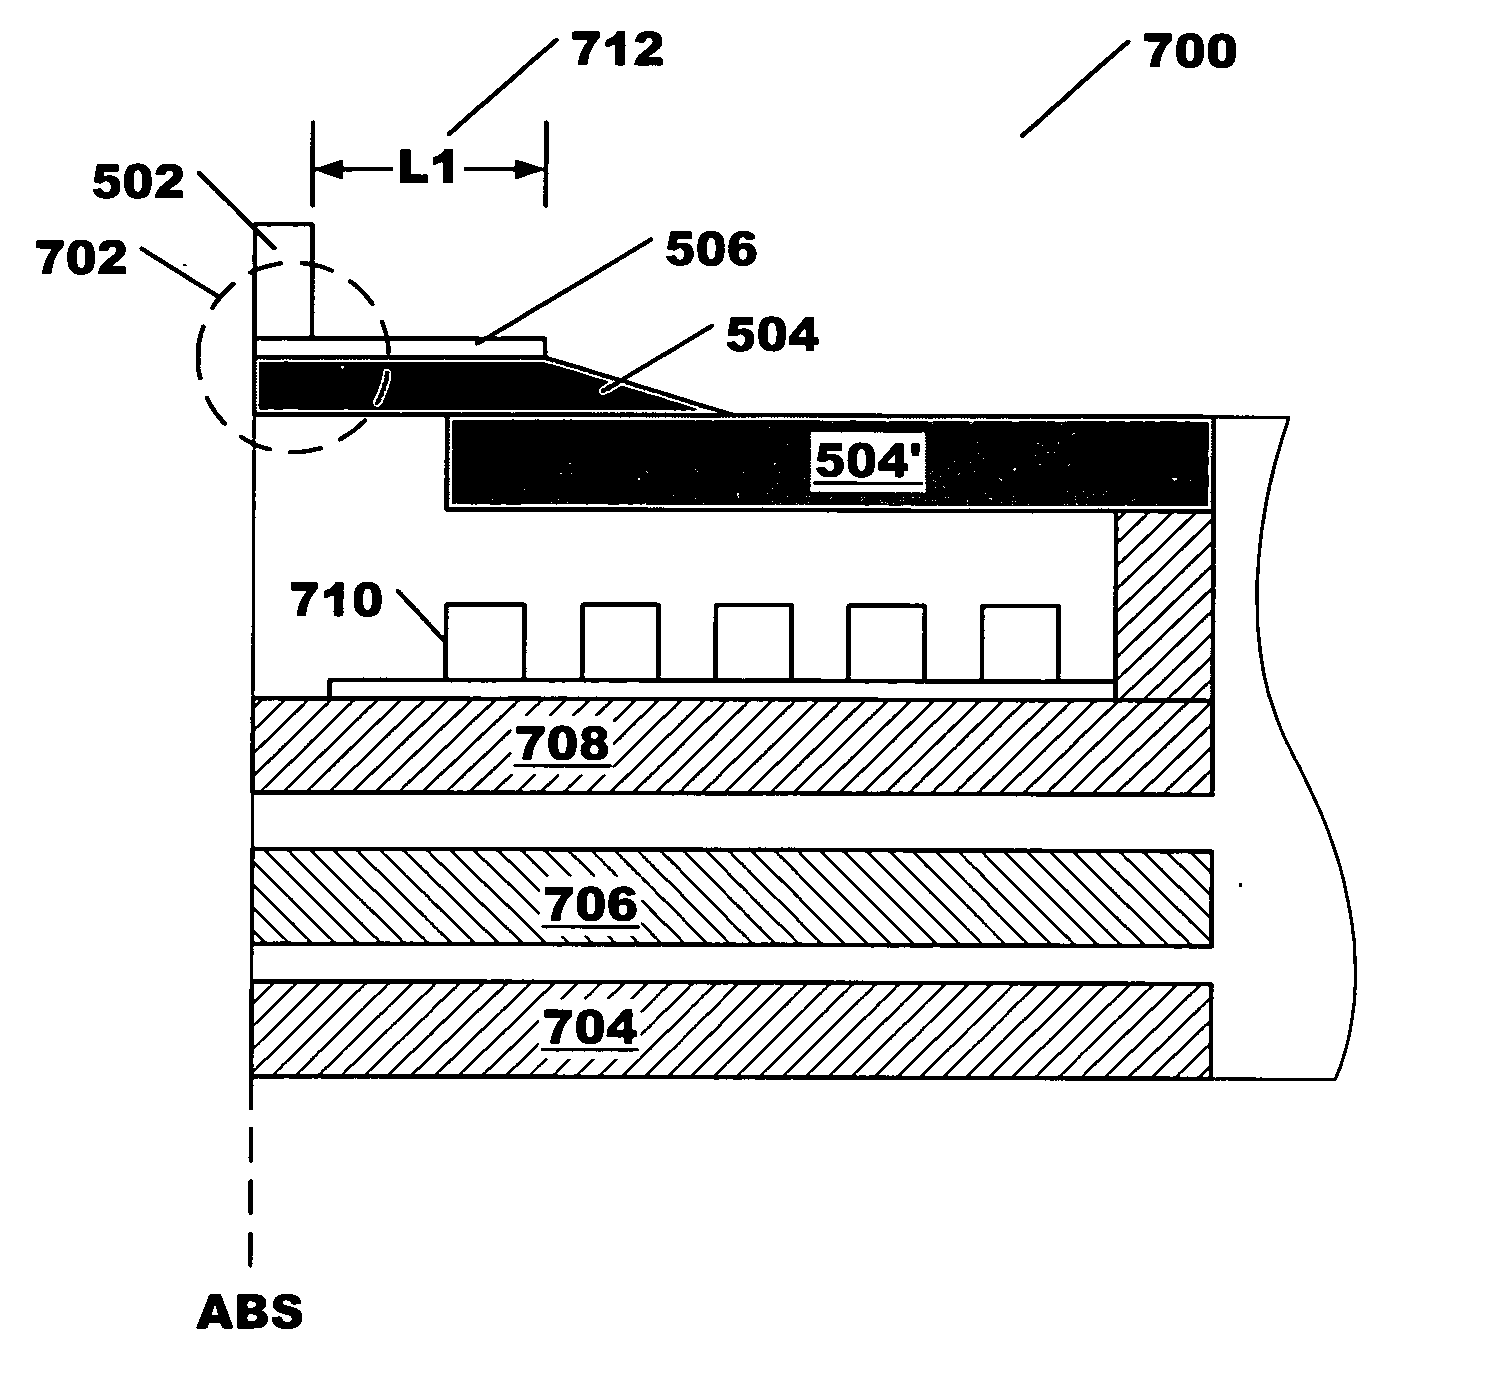 Structure and method for reduced corrosion of auxiliary poles during the fabrication of perpendicular write heads